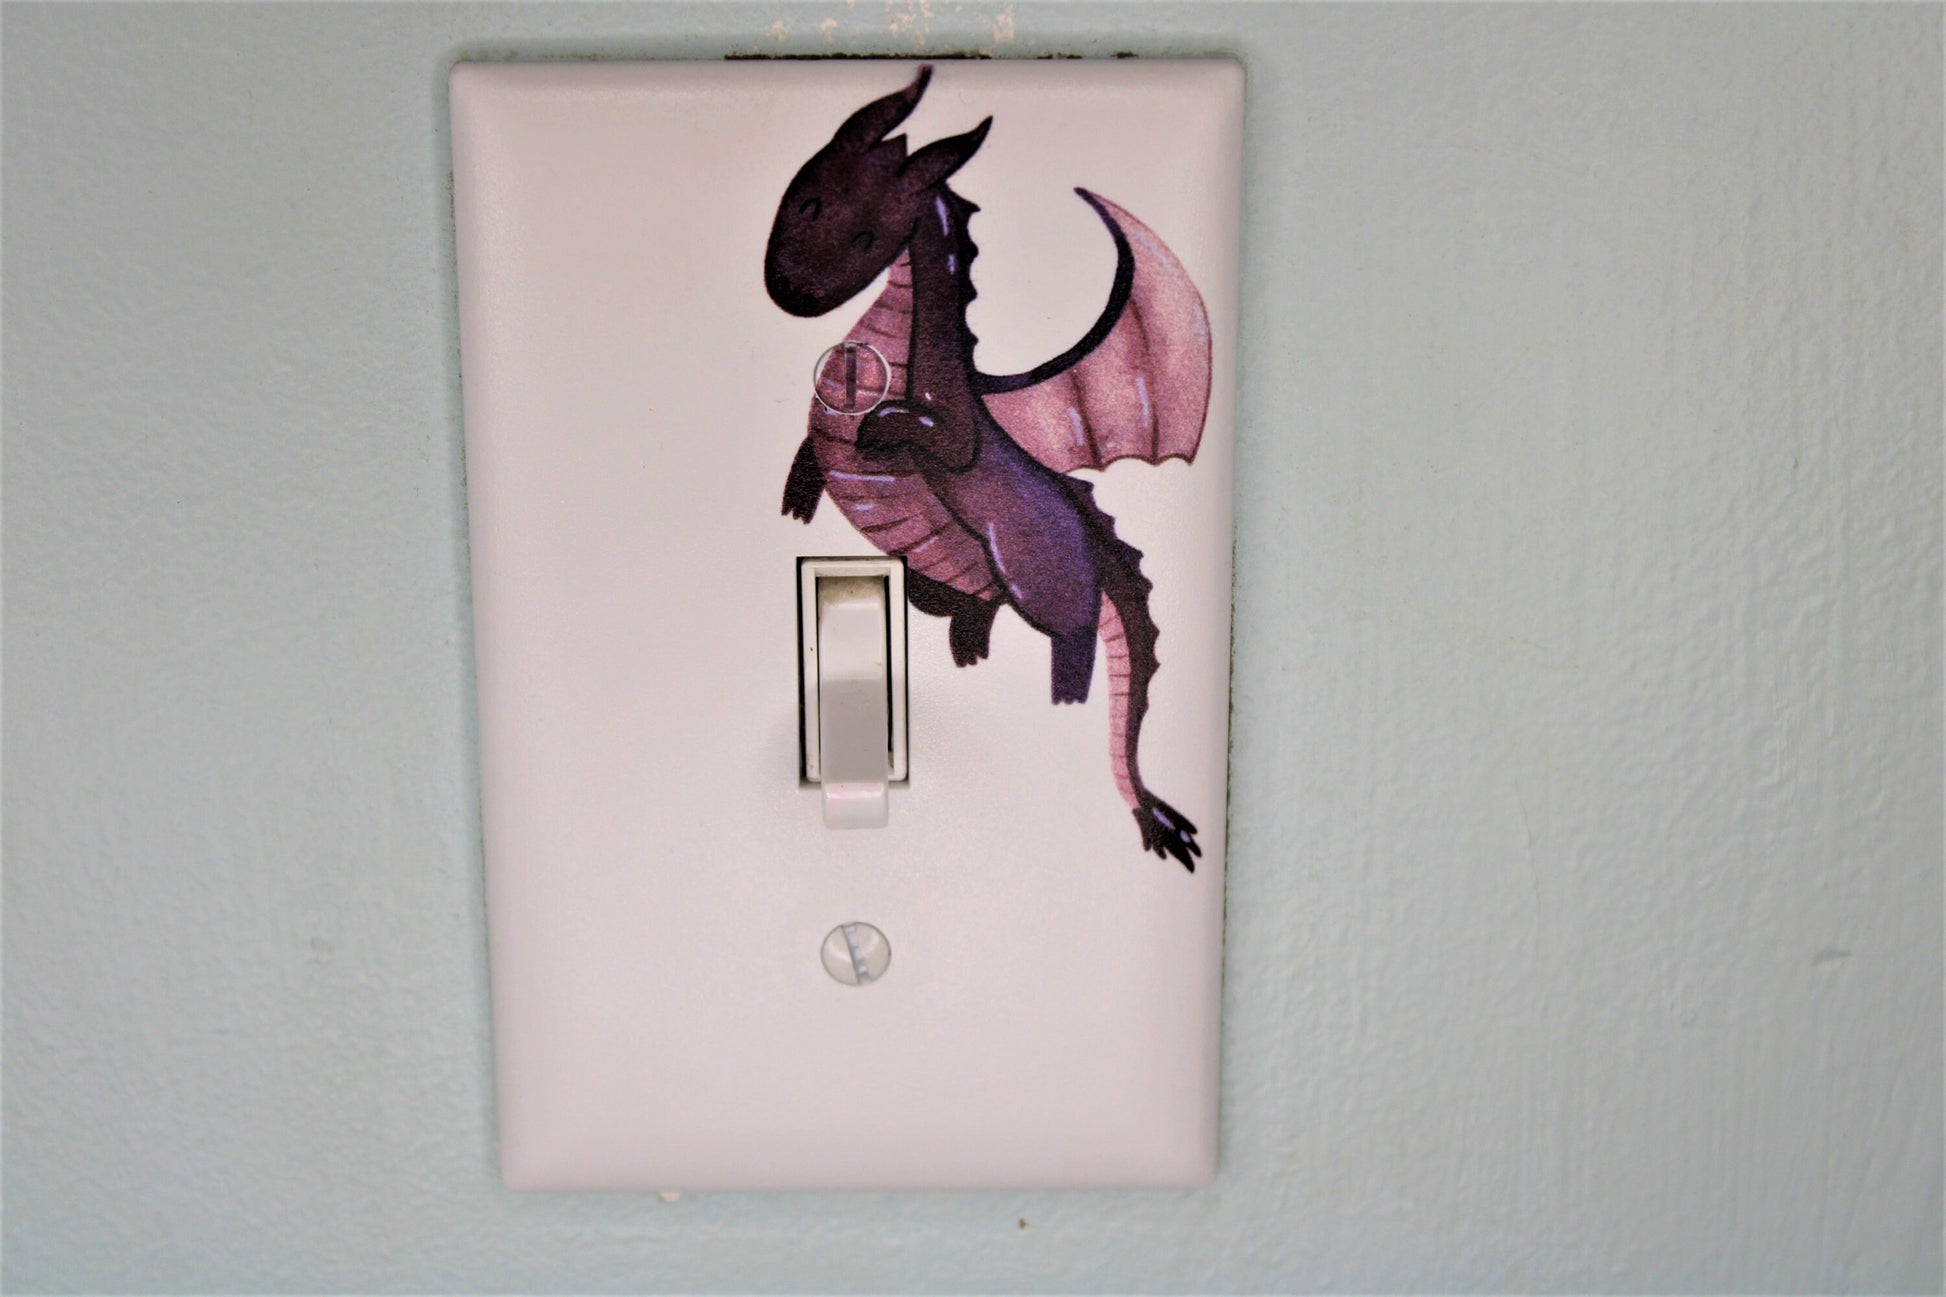 flying cute purple dragon cartoon prince princess room decor unique custom printed in color light switch plate cover durable fairytale theme